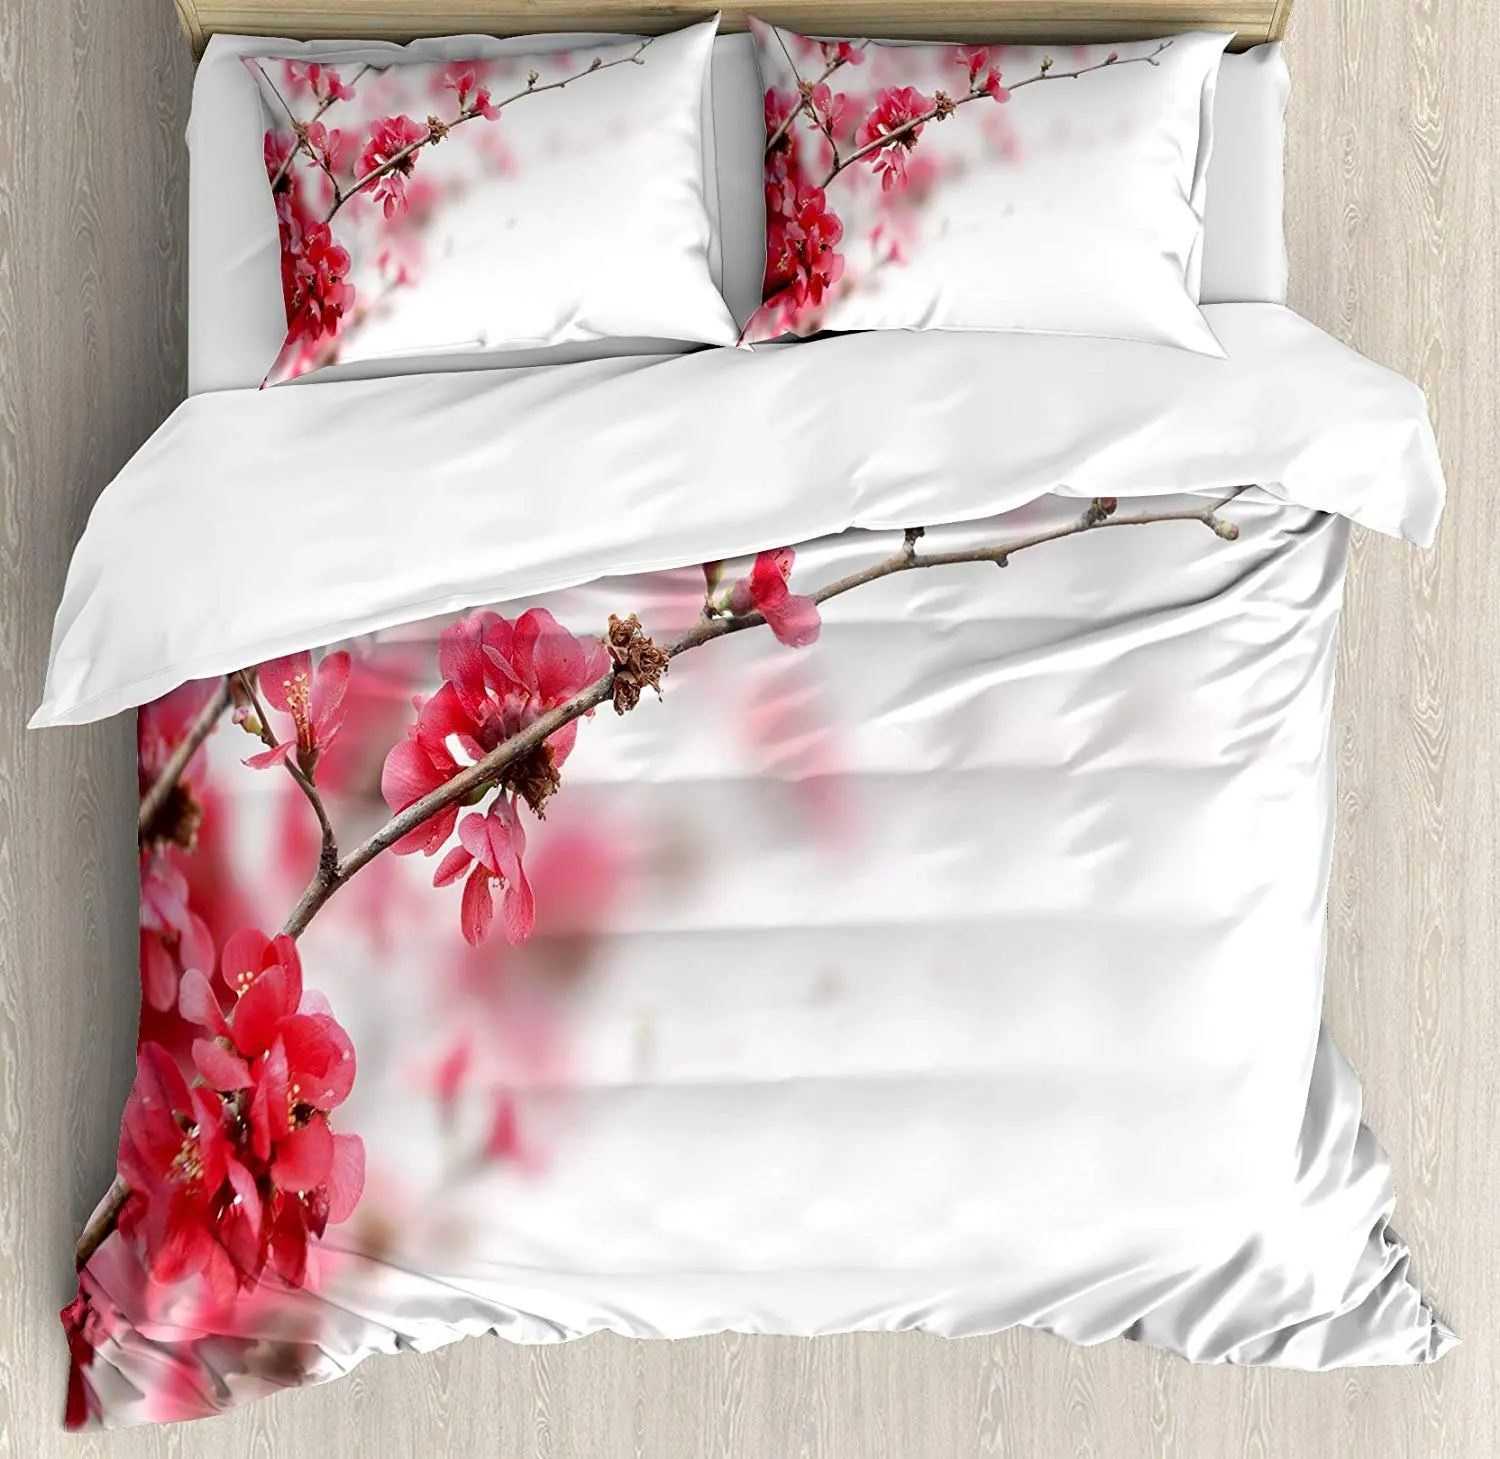 

Spring Bedding Set Nature Beauty Cherry Blossom Branches Misty Inspirational Japanese Blooms Duvet Cover Pillowcase Bed Set